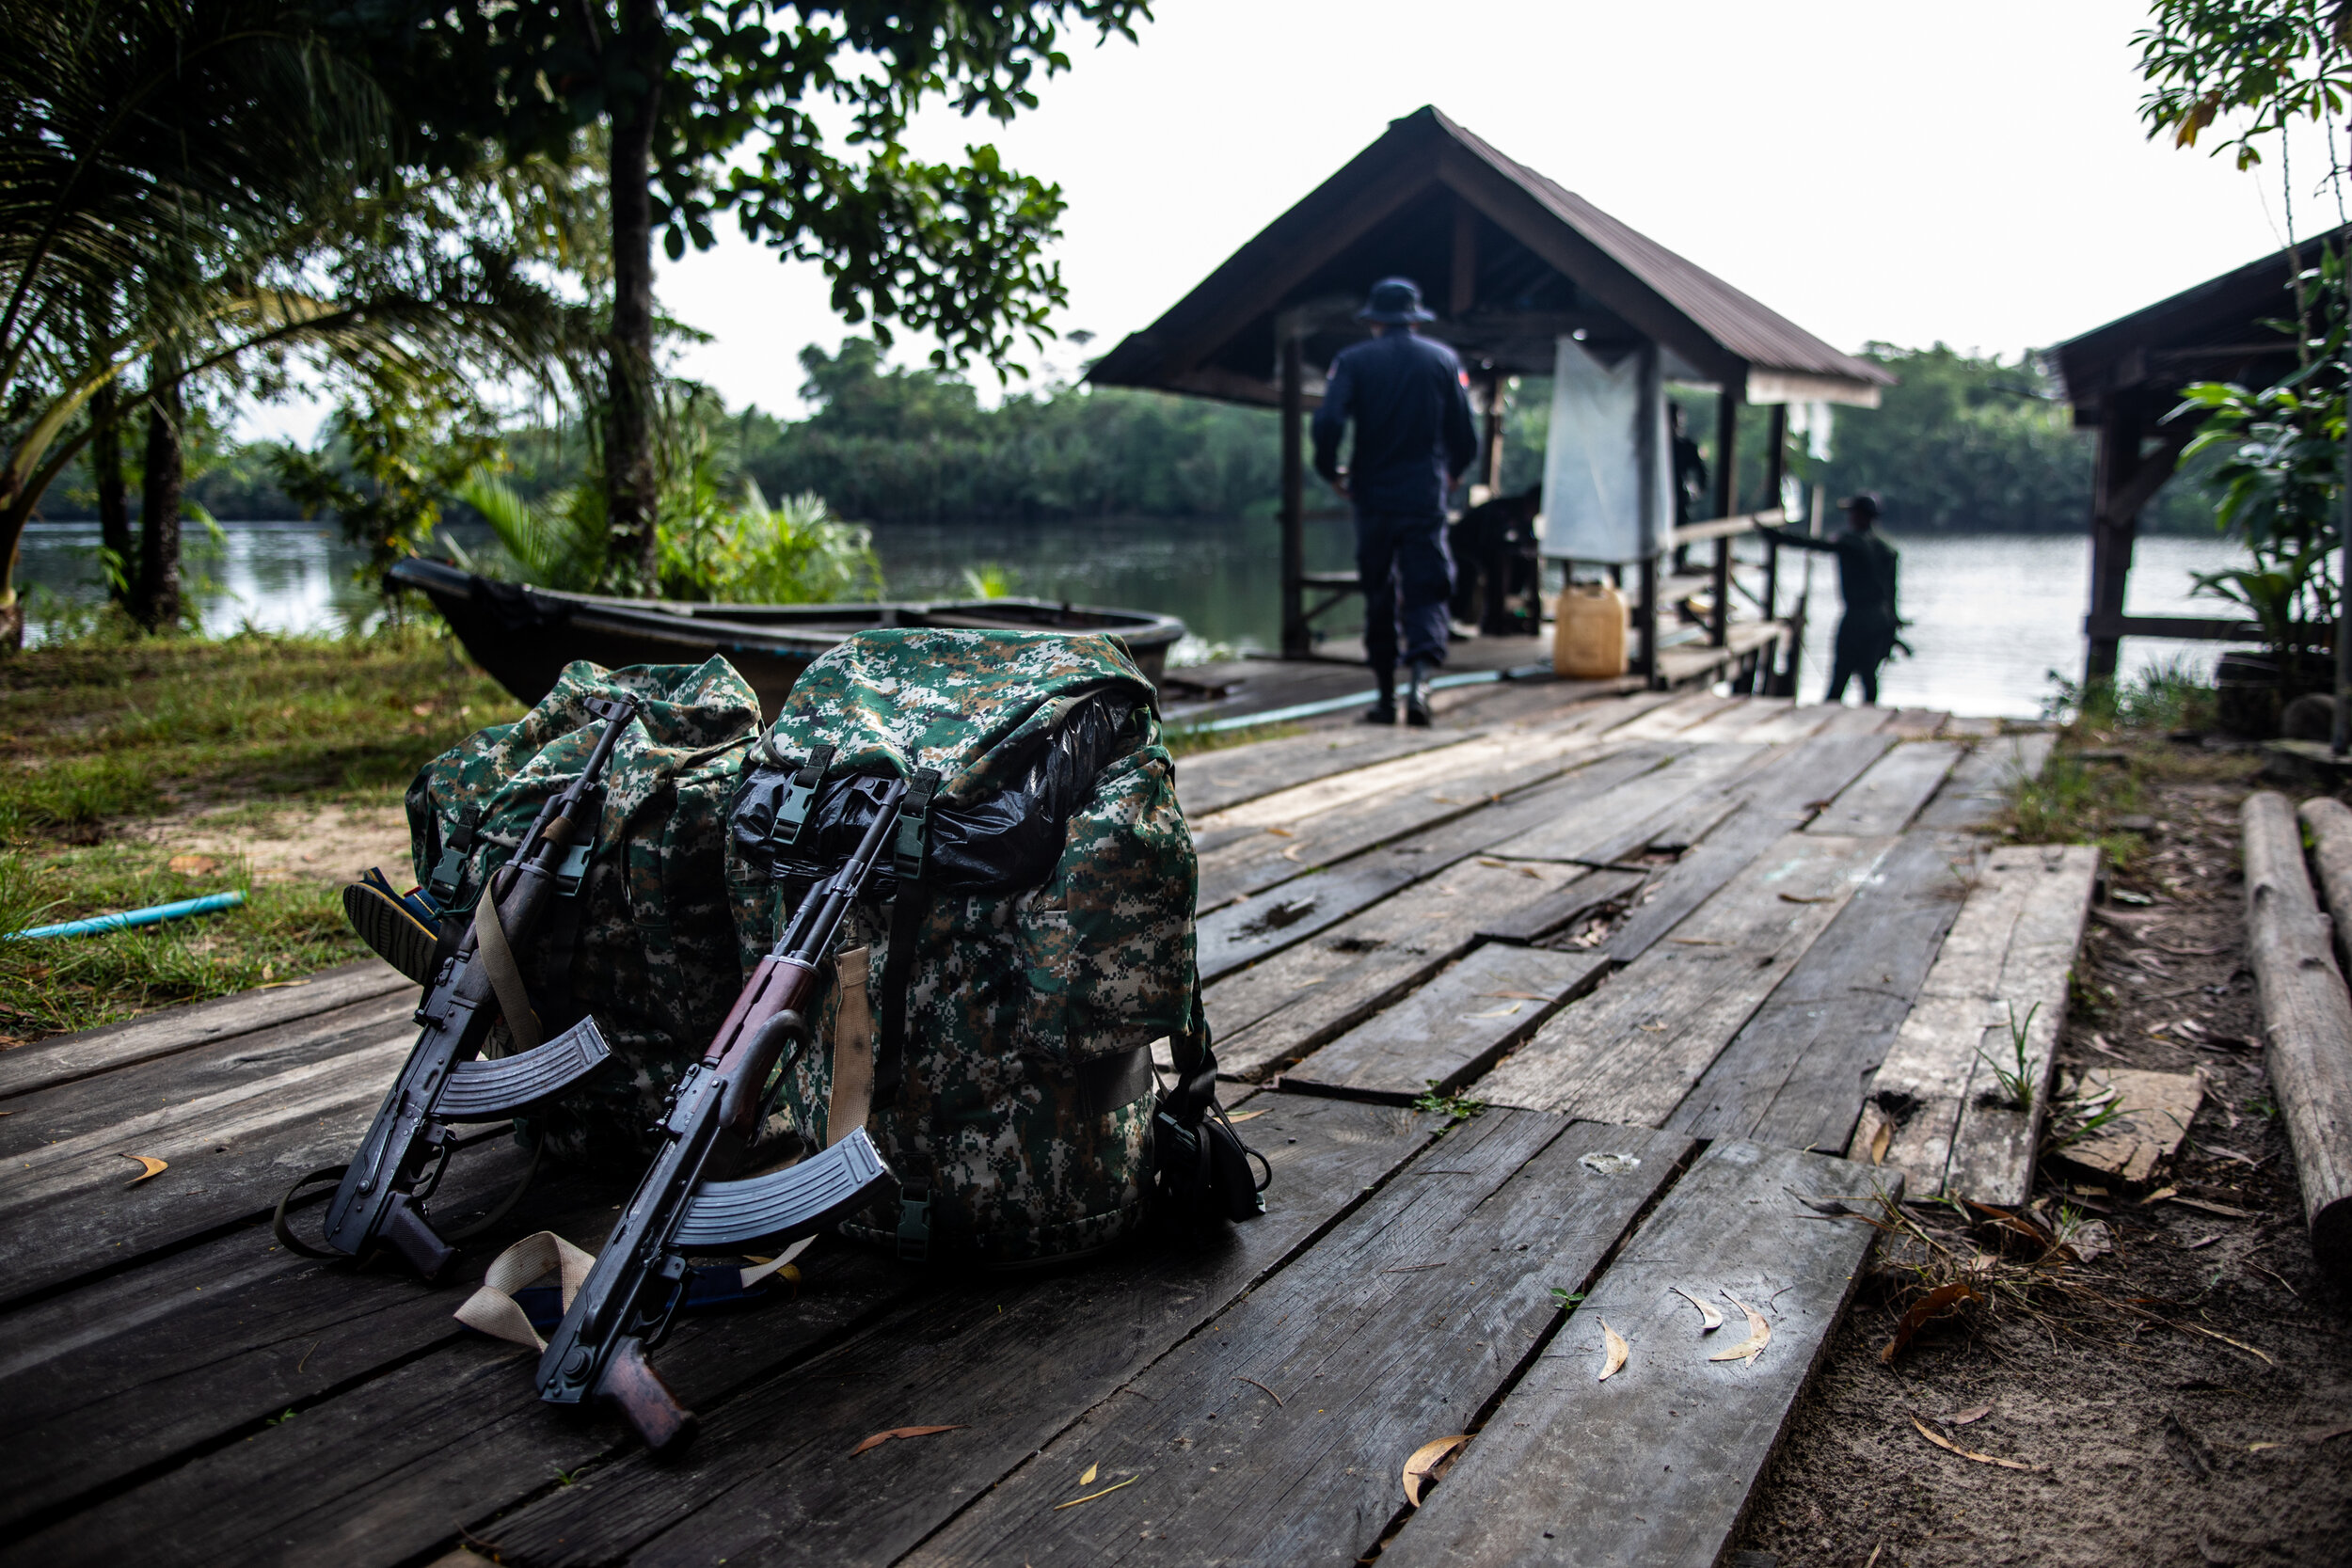  Rangers prepare their 2 day long patrol packs and guns at Stung Proat Station station before putting them in a boat and heading far up river to the drop off point.   The rangers carry the least amount of weight possible for the ease walking off trai